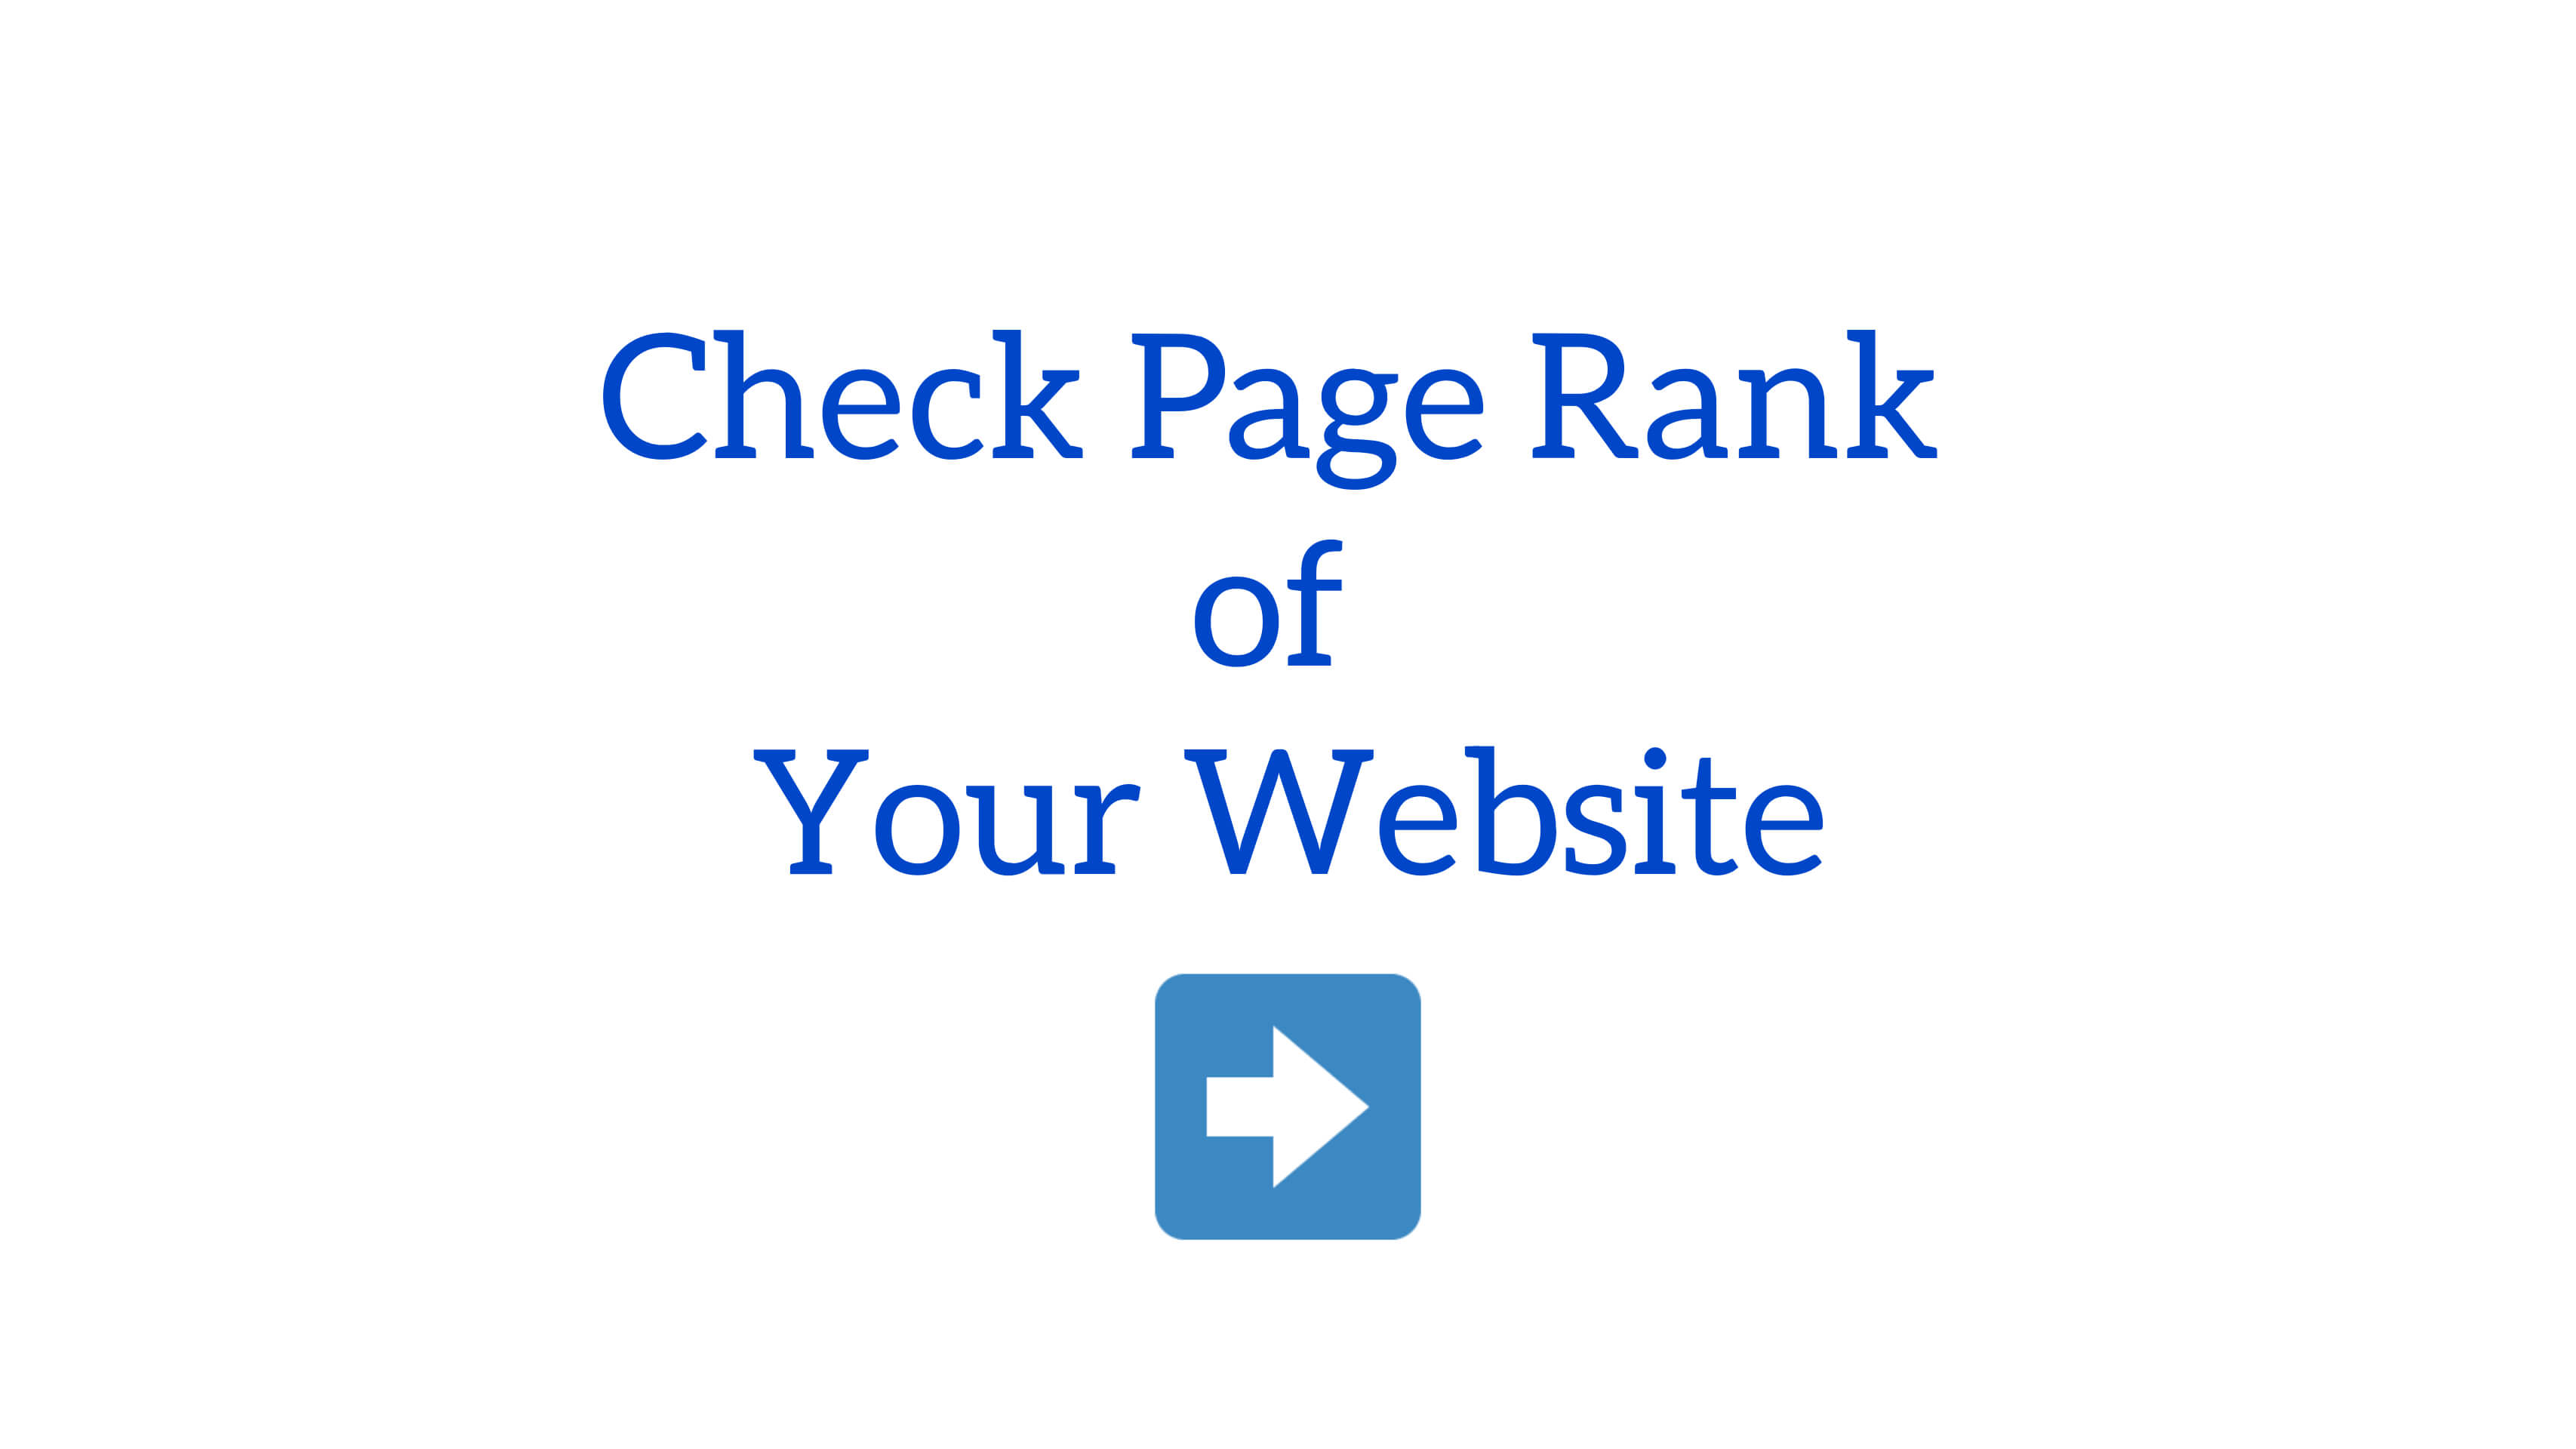 Check Page Rank of Your Website